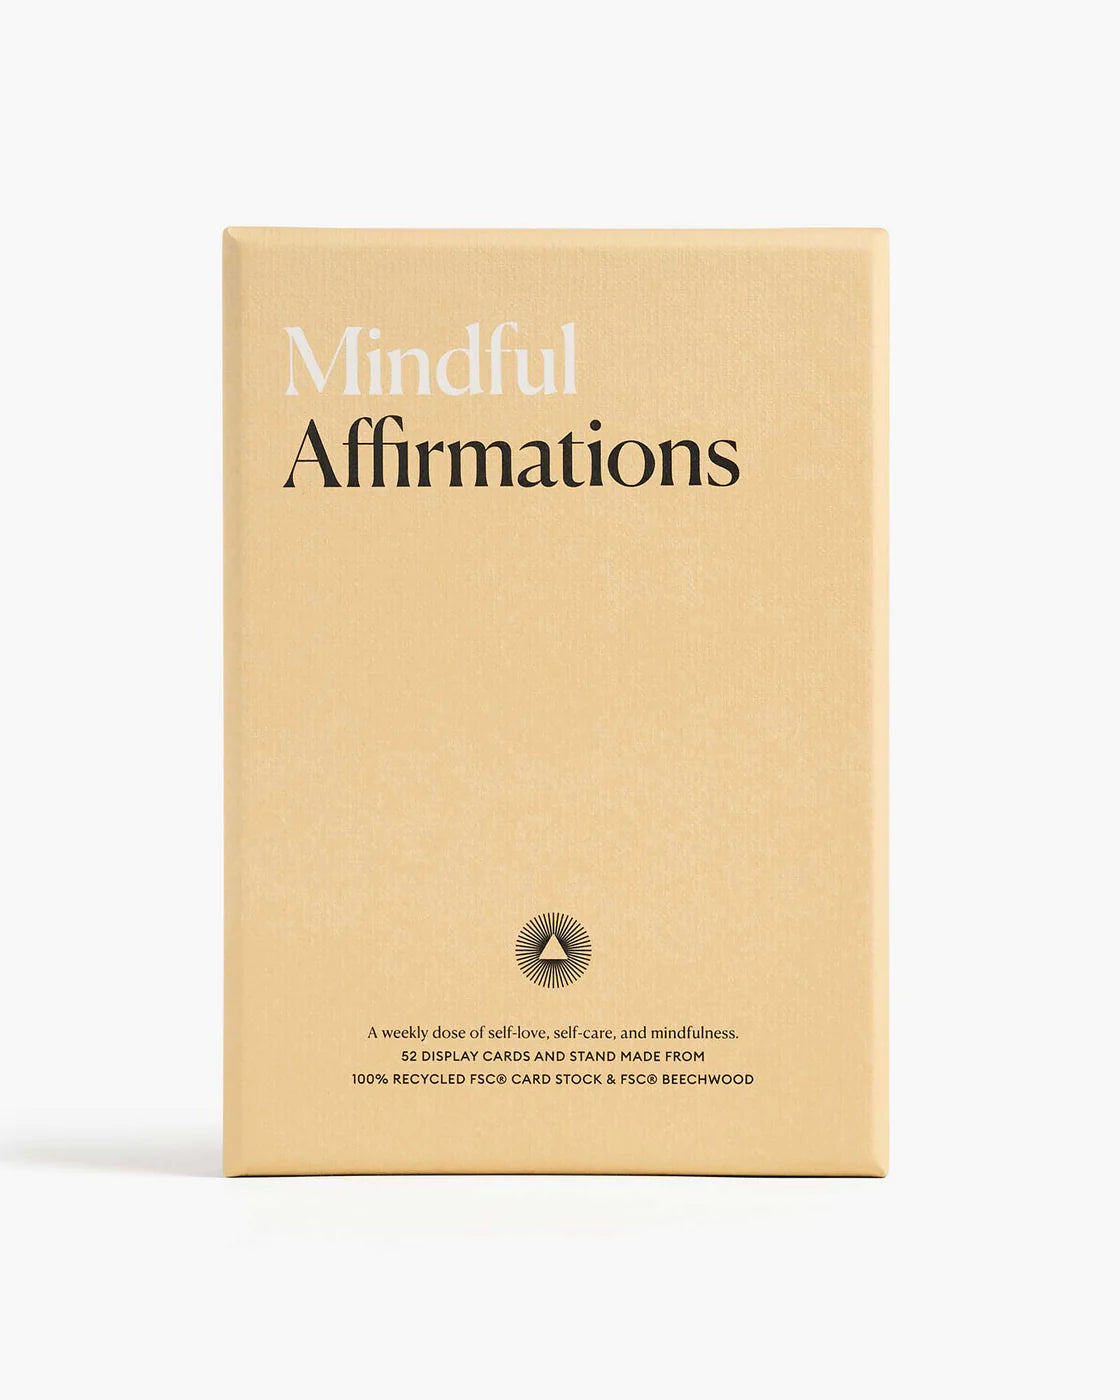 Mindful affirmations in nature